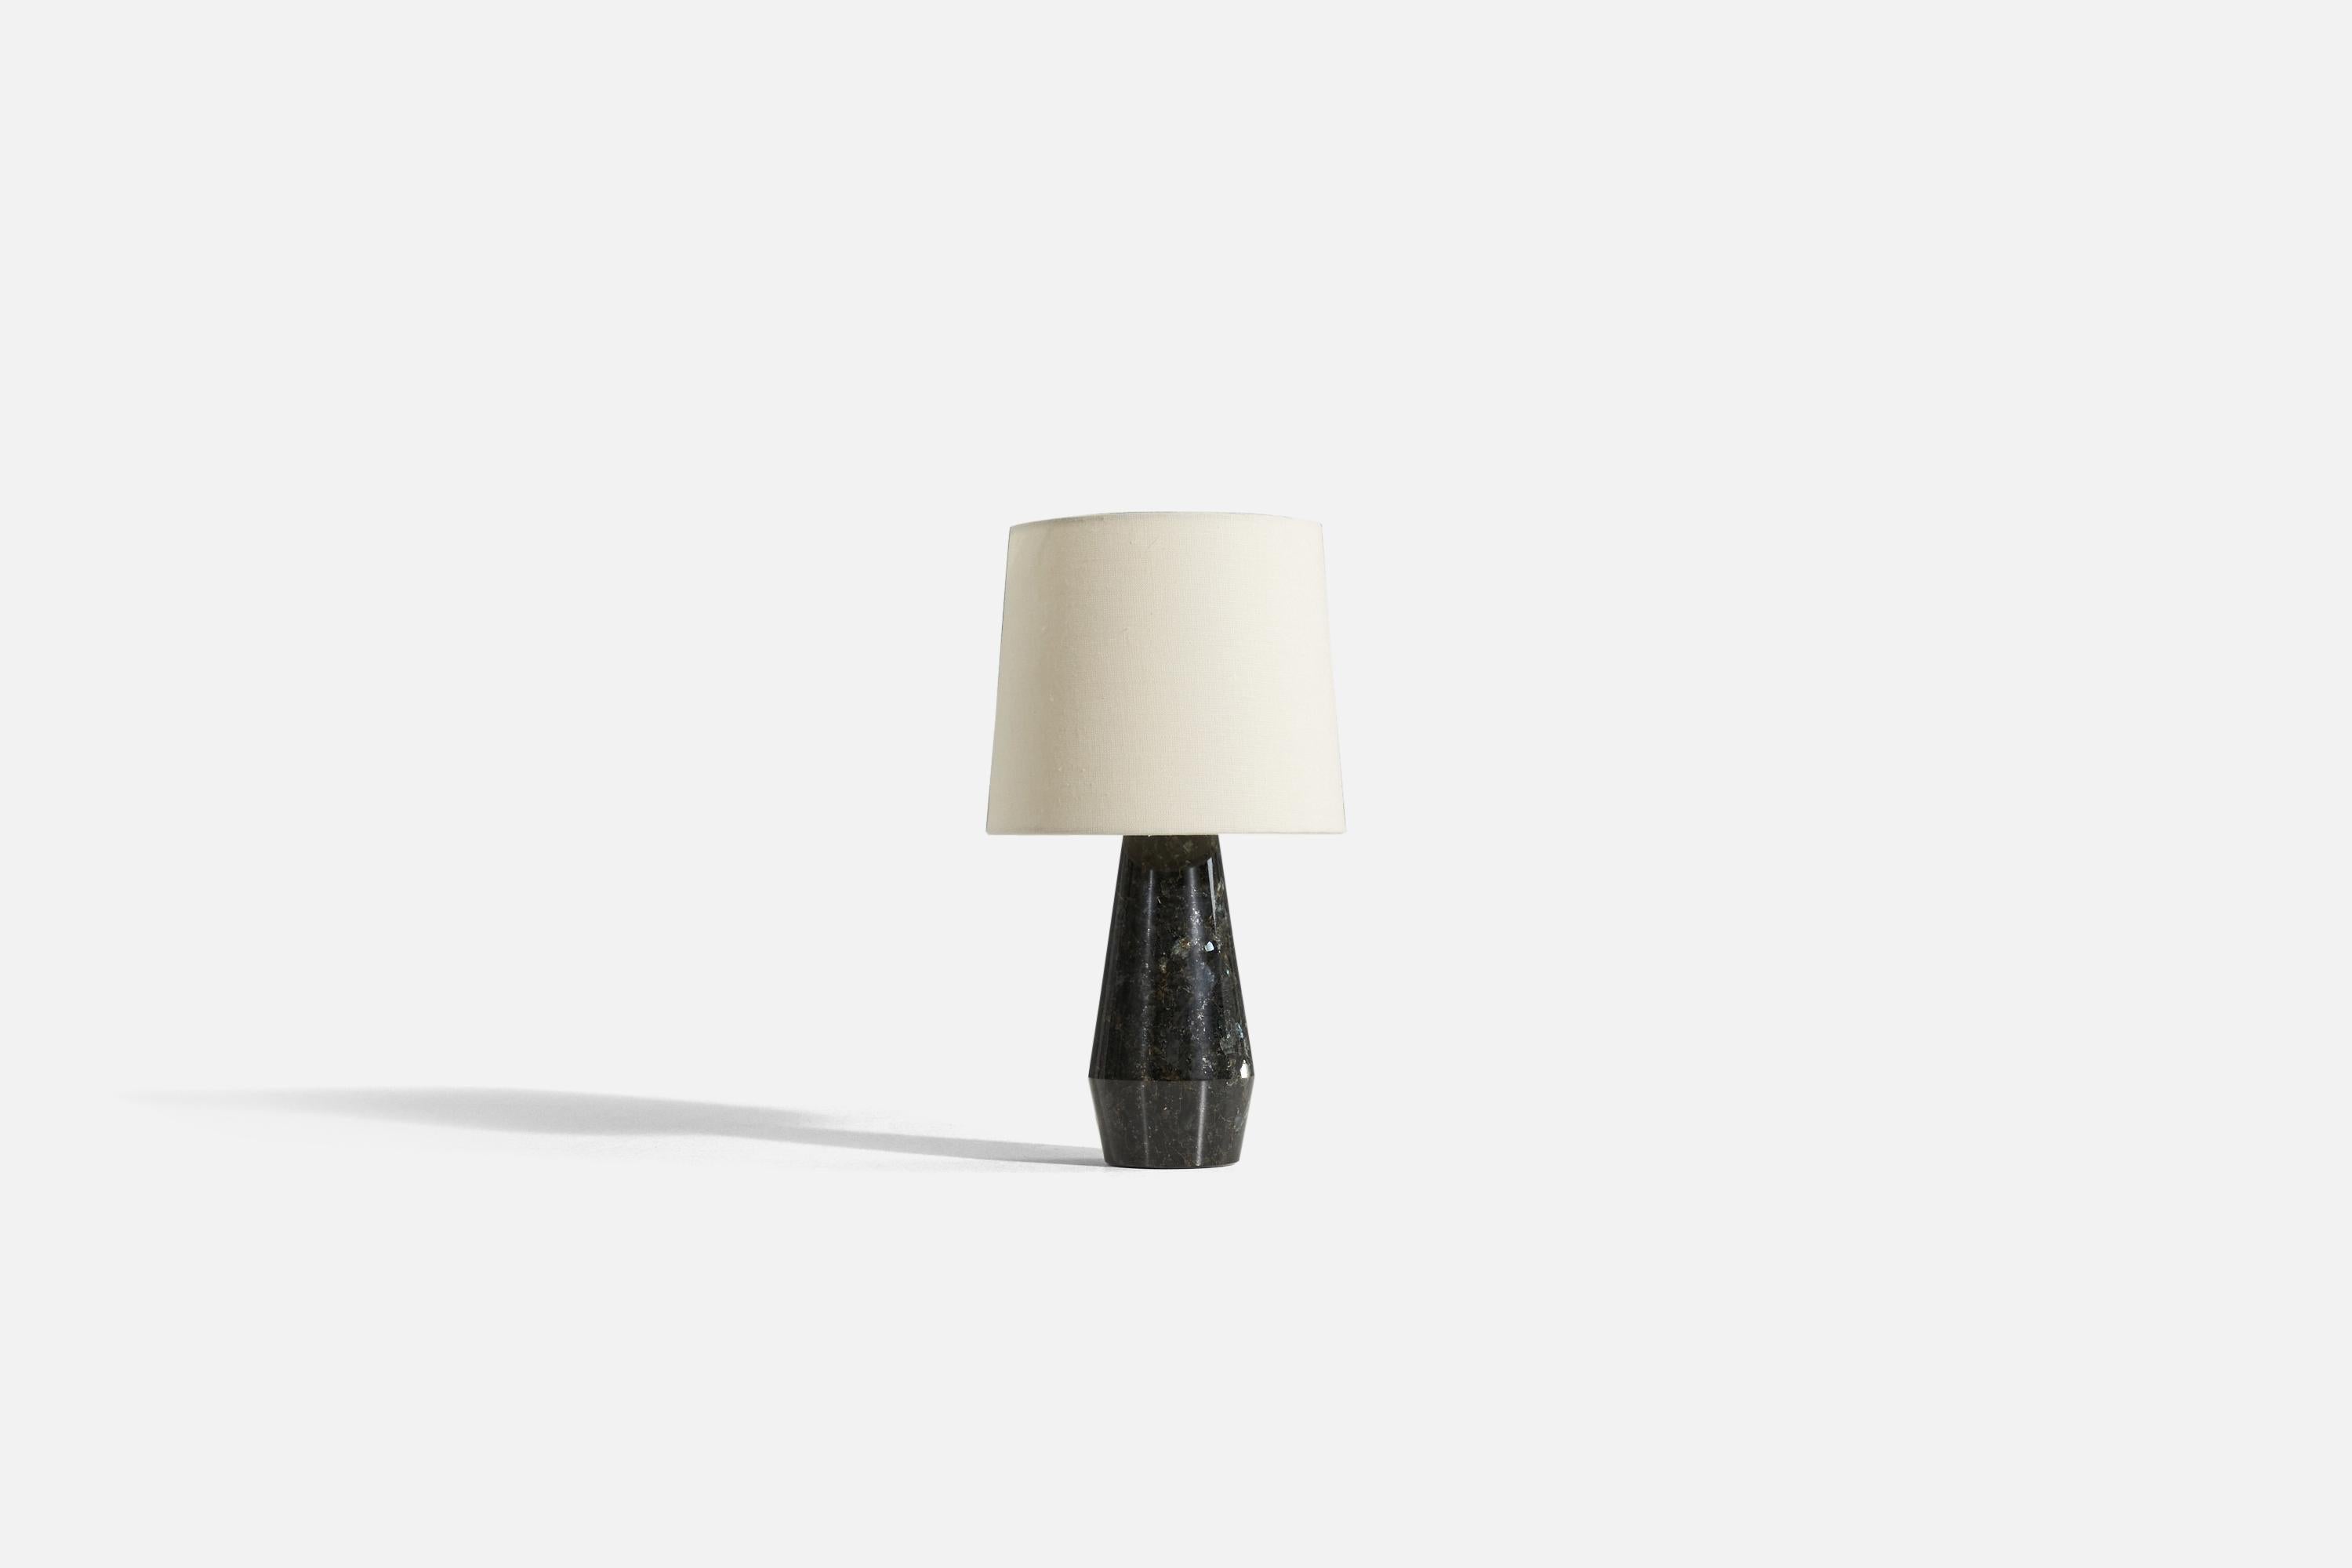 A belgian black marble table lamp produced by a Swedish designer, Sweden, 1960s.

Sold without lampshade. 

Dimensions of lamp (inches) : 11.125 x 3.875 x 3.875 (H x W x D)
Dimensions shade (inches) : 7 x 8 x 7 (T x B x H)
Dimension of lamp